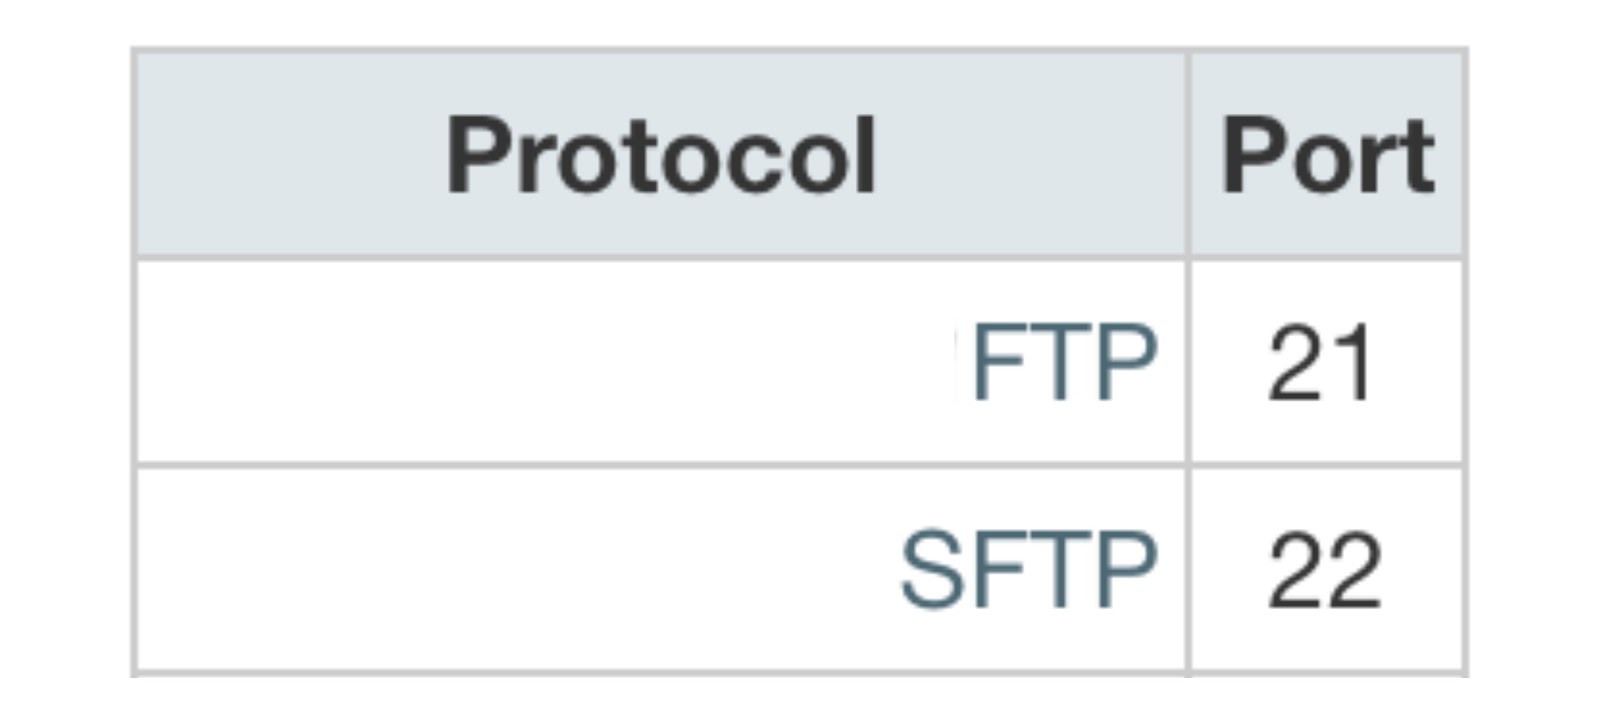 FTP protocol port 21 and SFTP port 22.